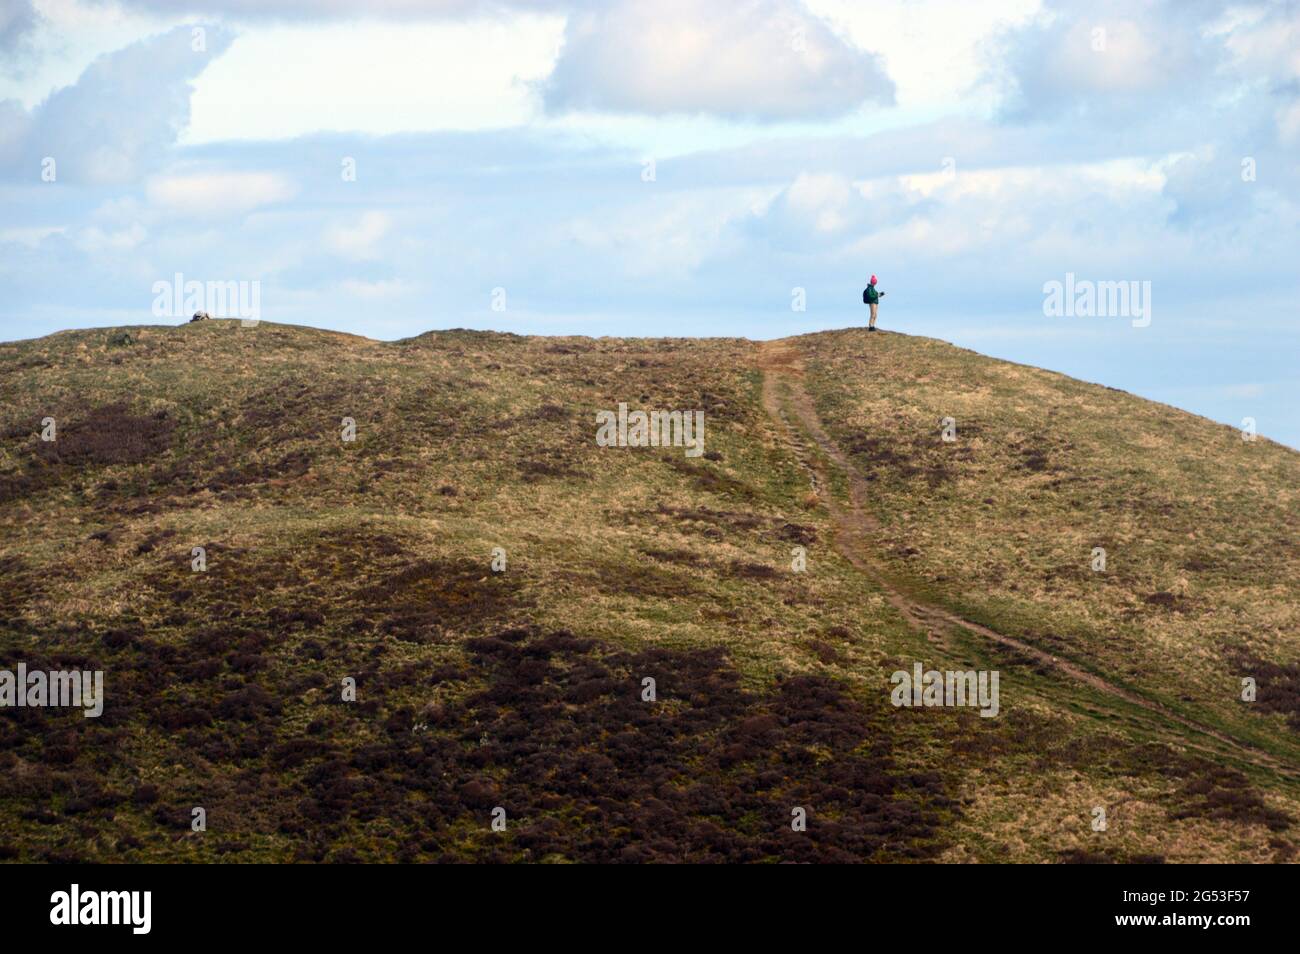 Lone Male Hiker Standing on the Summit of the Wainwright Low Fell in the  Lake District National Park, Cumbria, England, UK. Stock Photo